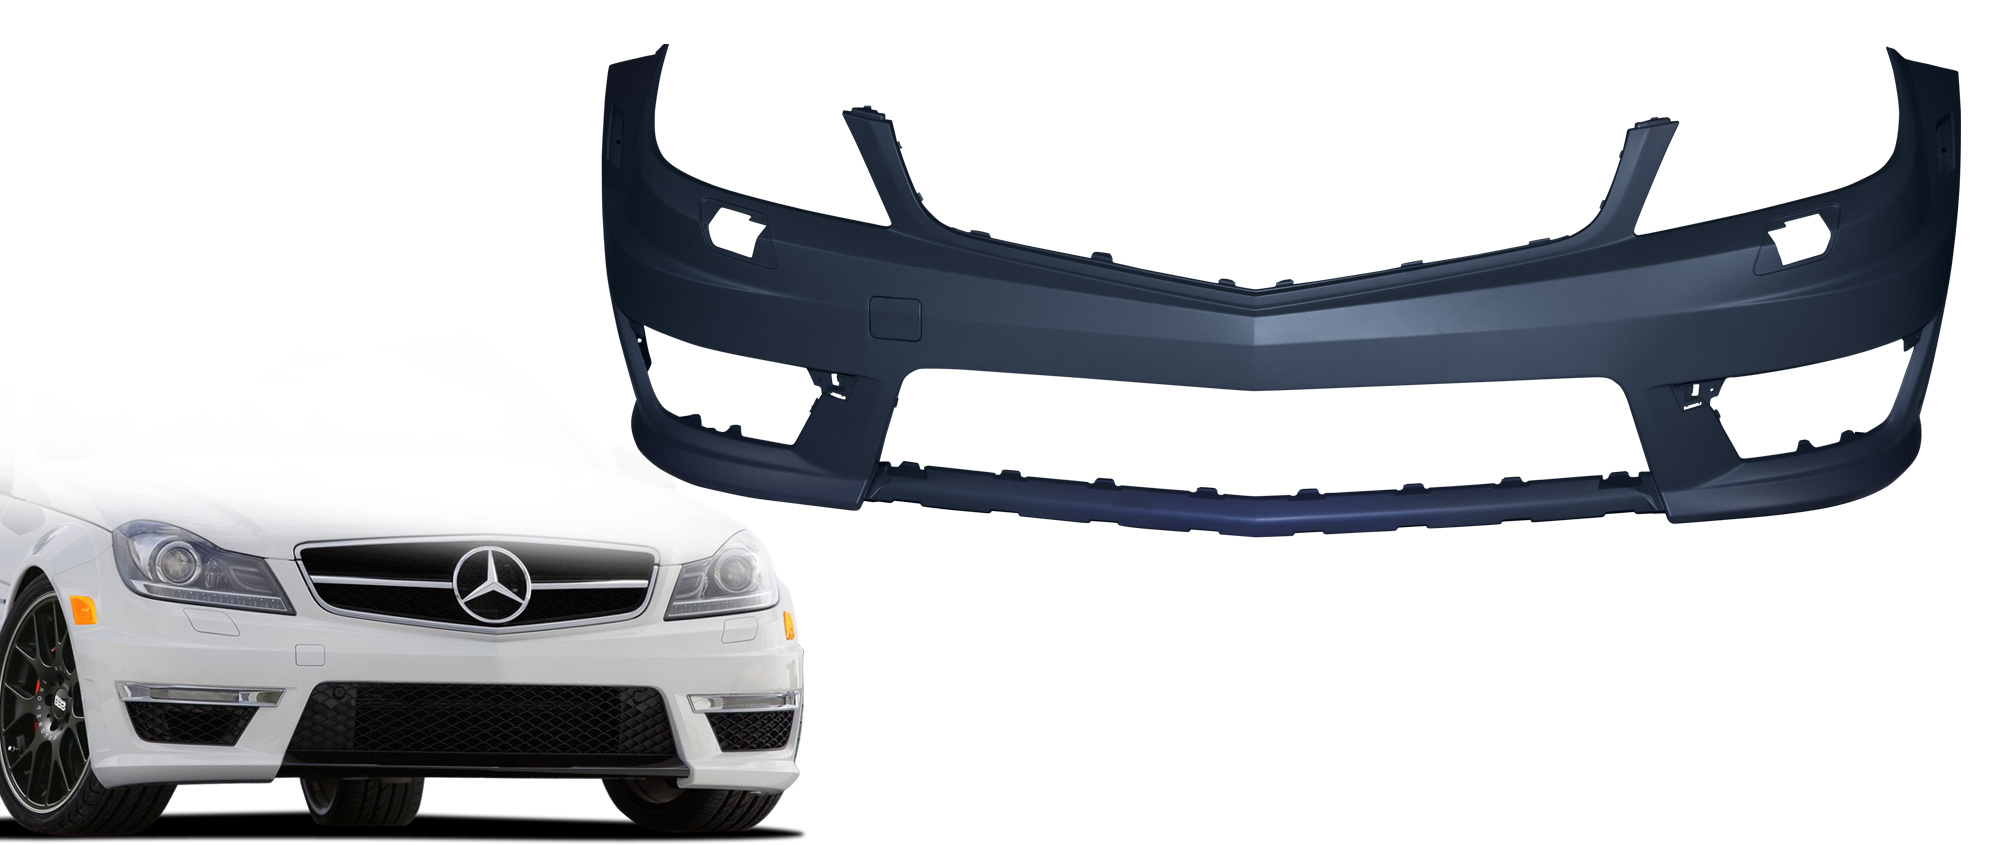 2013 Mercedes C Class ALL - Polypropylene Front Bumper Bodykit - Mercedes C Class W204 Vaero C63 Look Conversion Front Bumper Cover ( without PDC ) -